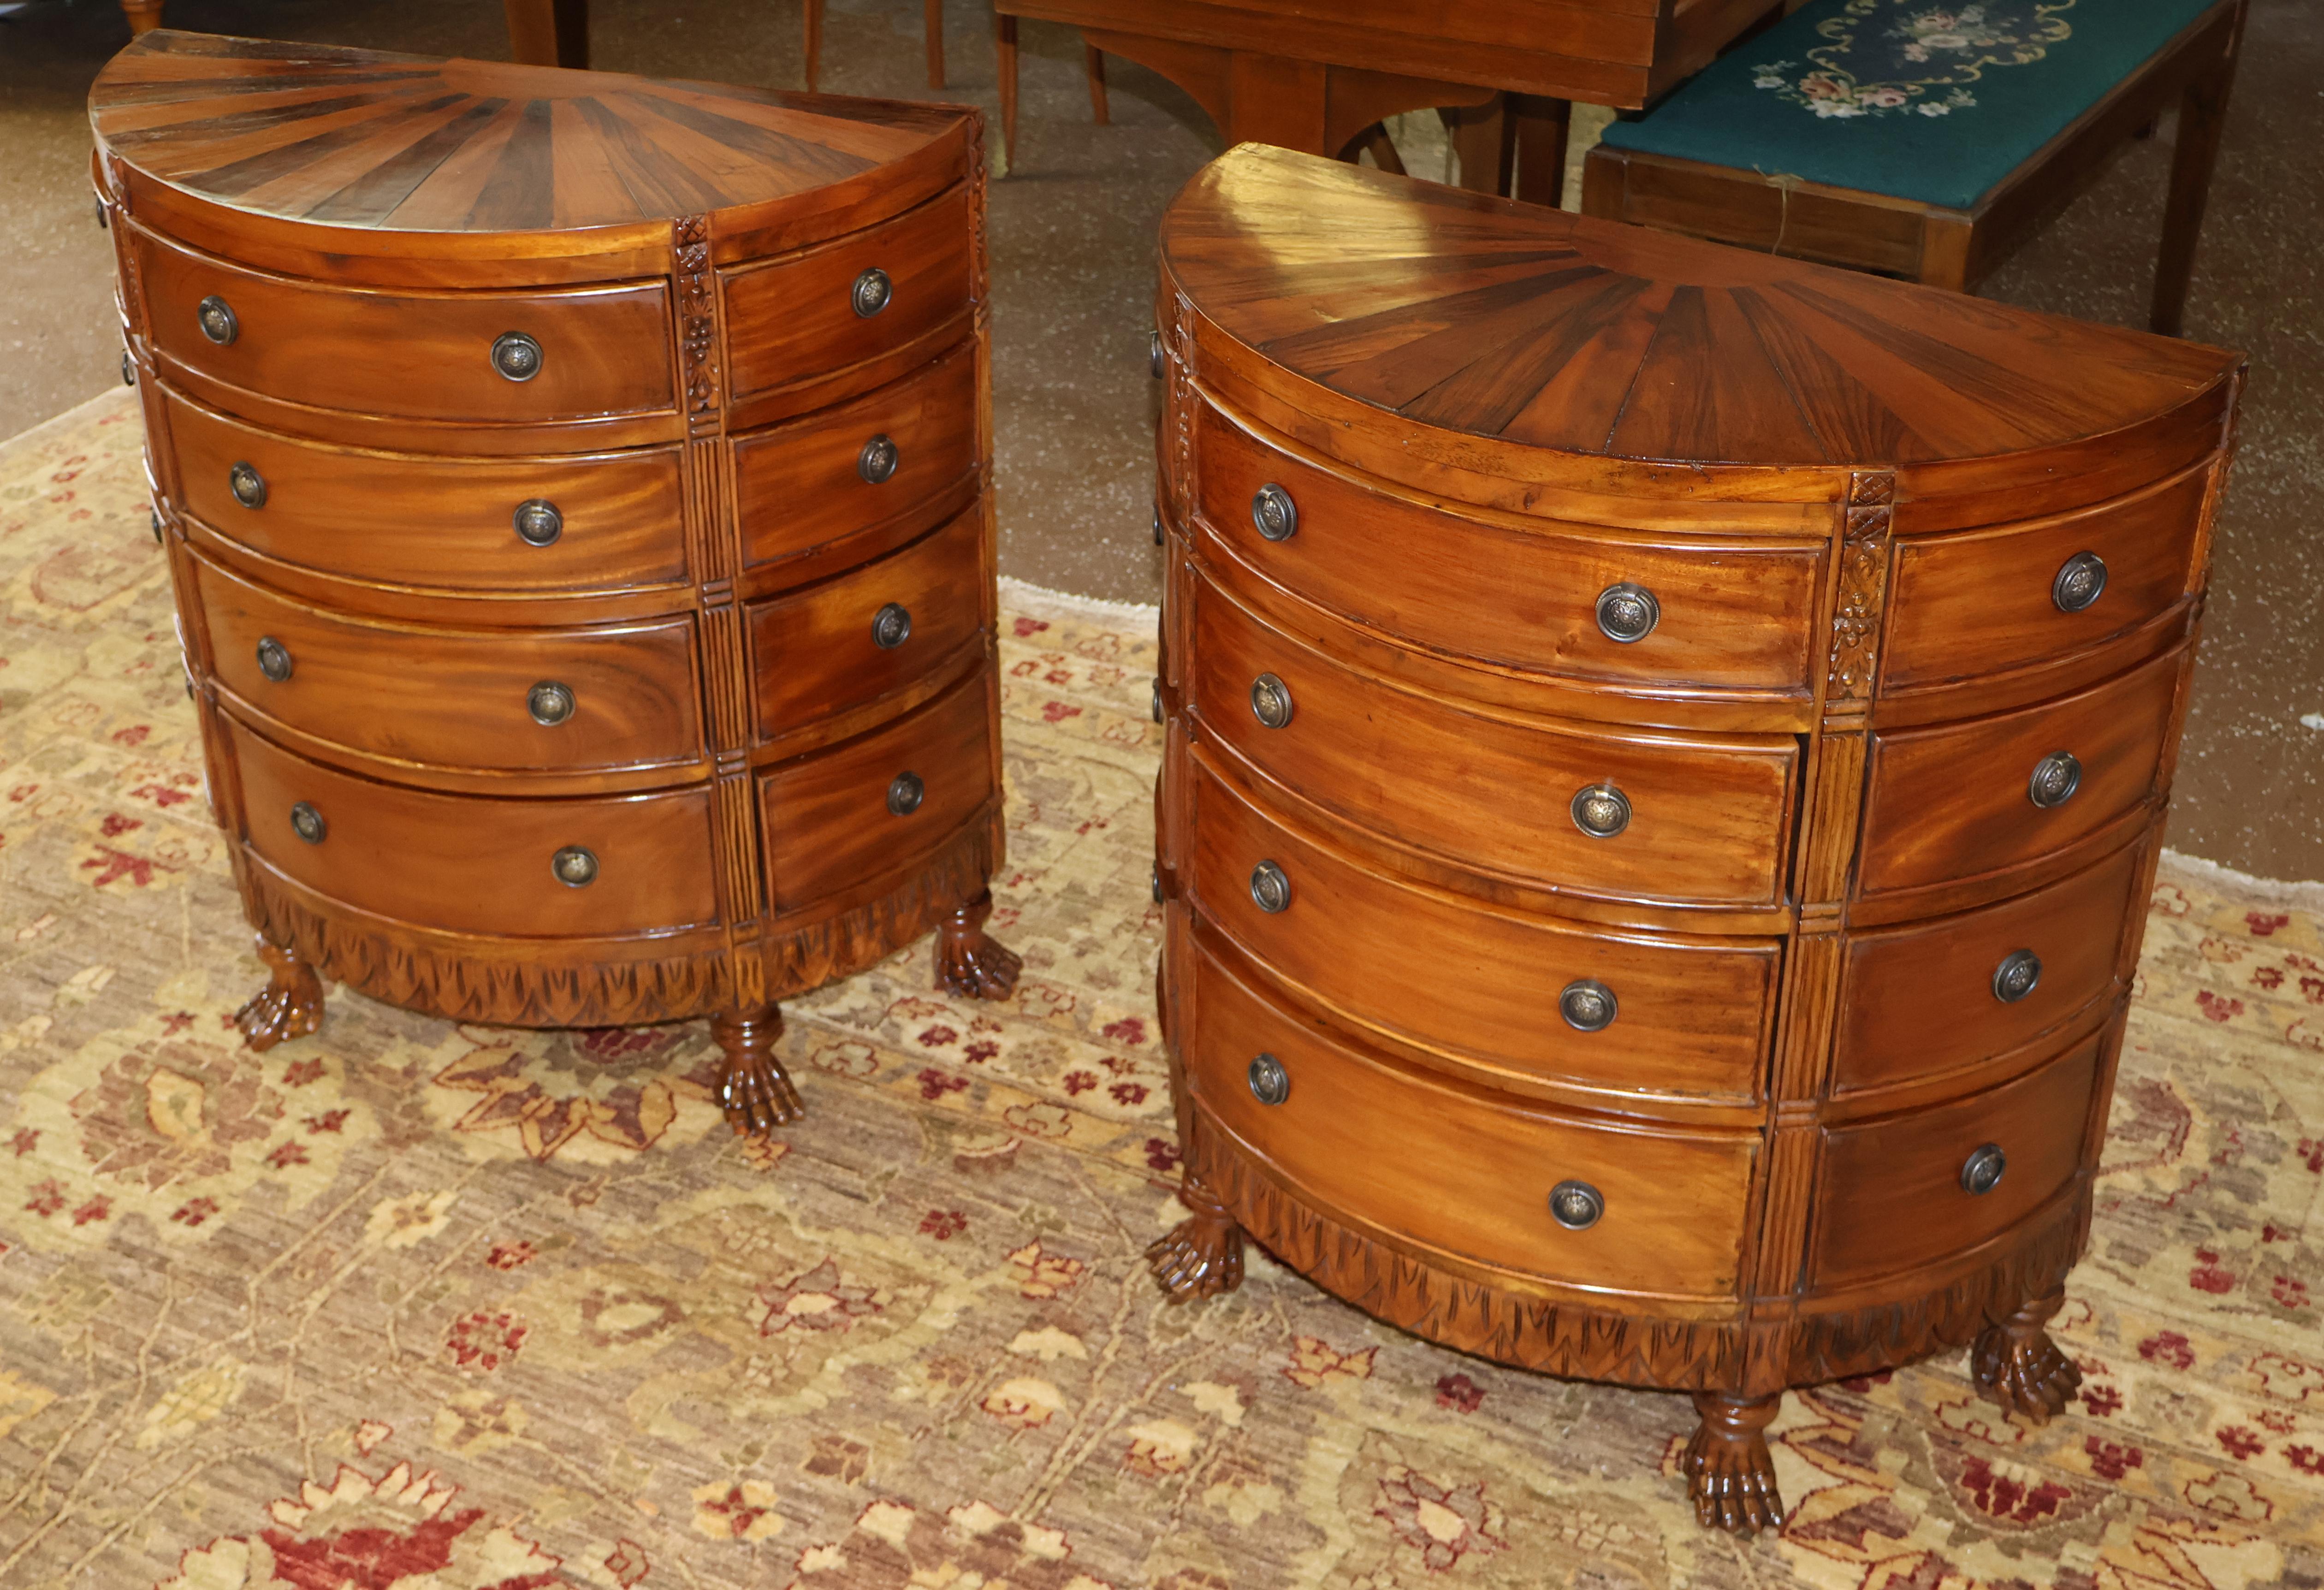  Pair of Georgian Style Mahogany Sunburst Pattern Demilune Chest of Drawers In Good Condition For Sale In Long Branch, NJ